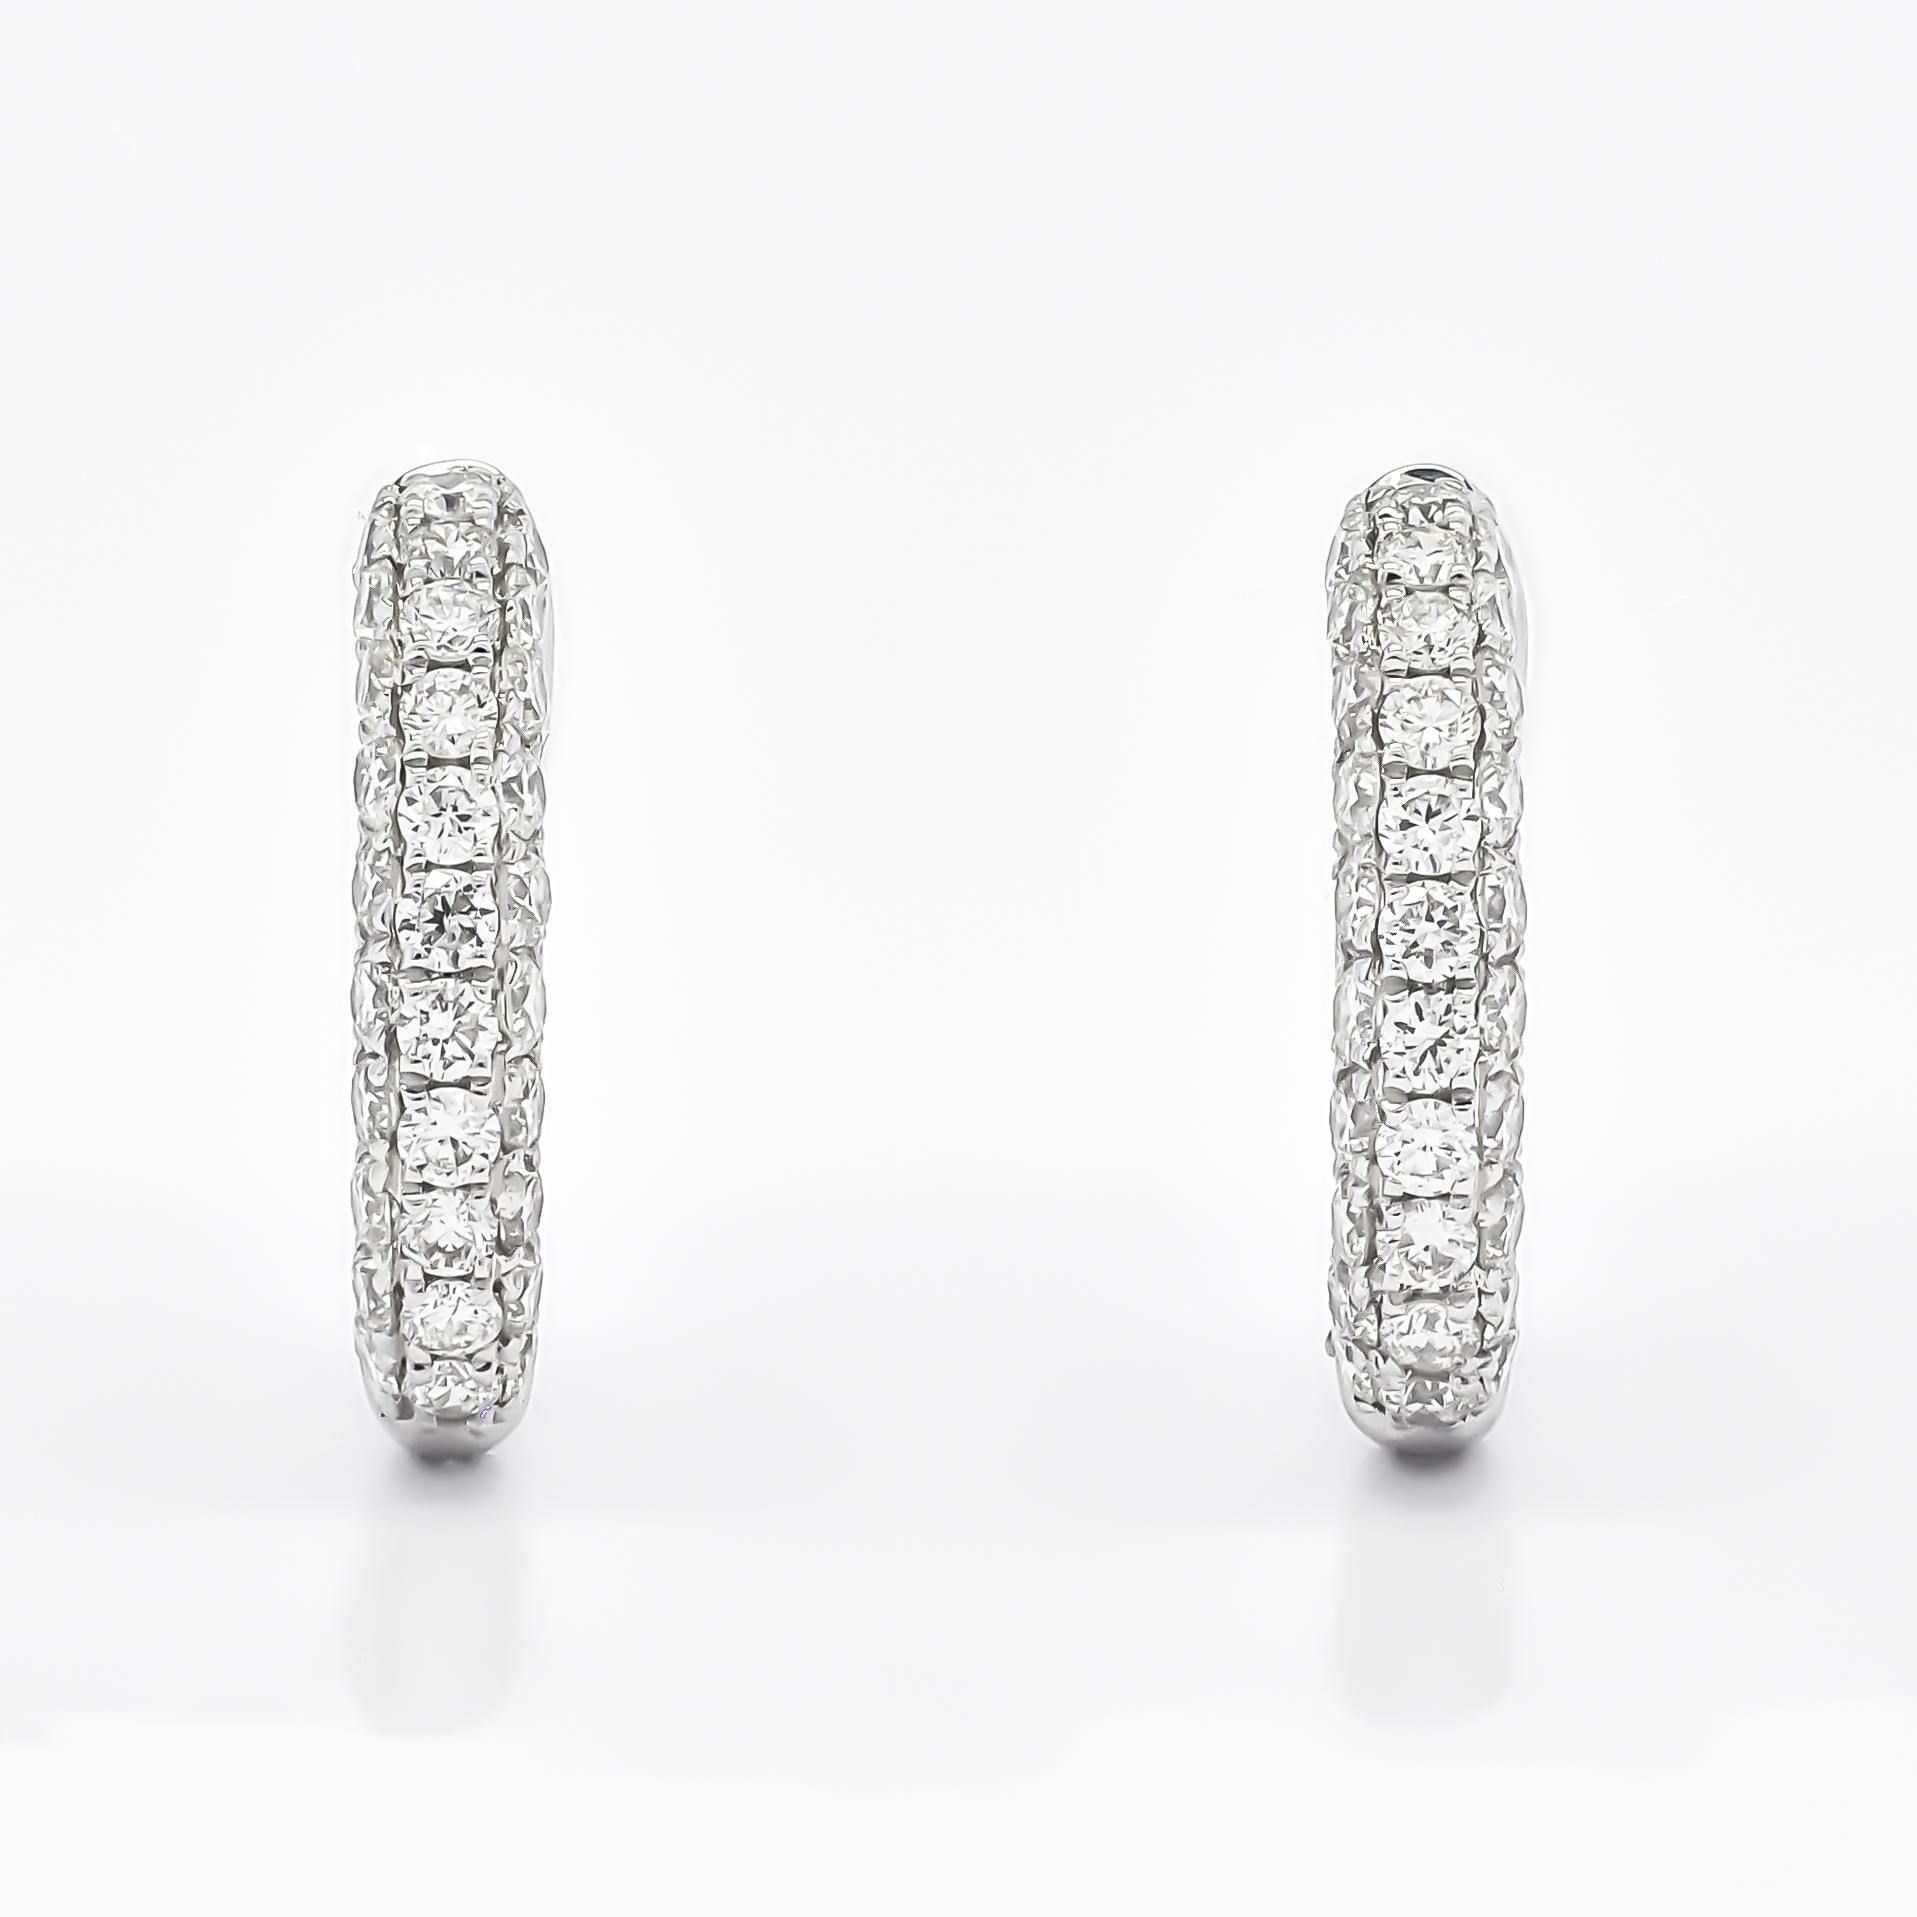 These magnificent 18KT Yellow Gold Natural Diamond Multi 3-Row Petite Half Hoop Huggie Earrings embody the perfect blend of luxury and simplicity. As an ideal gift for a woman who appreciates elegant aesthetics, they carry the promise of timeless